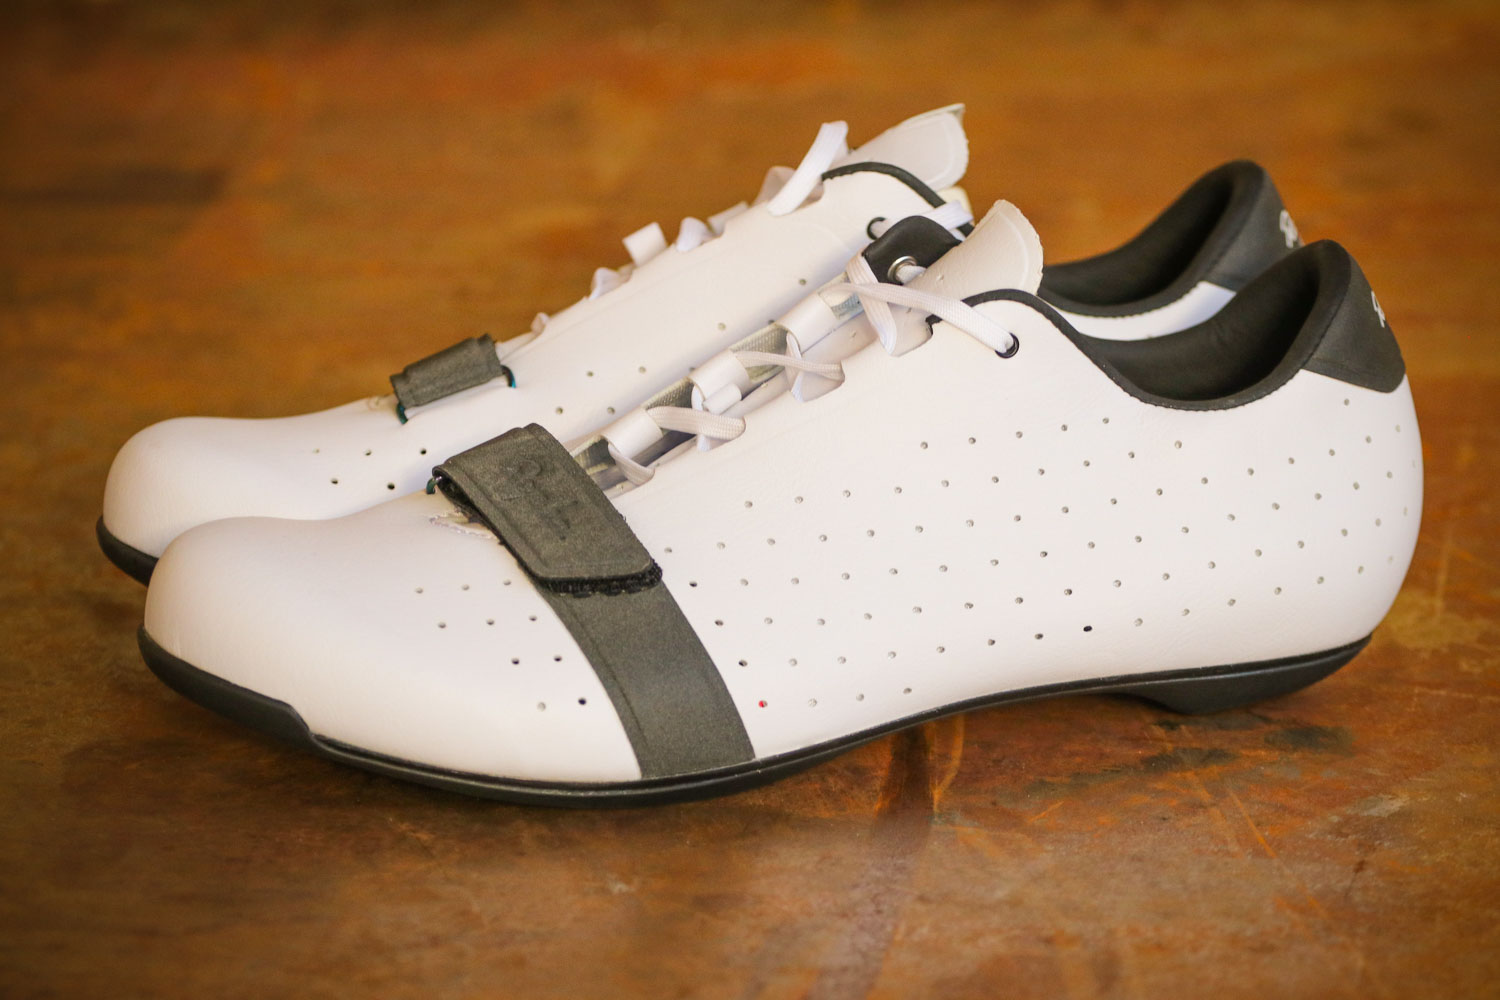 Details about   Rapha Classic Cycling Shoes Black Size 6.75 UK 40.5 EU Brand New Boxed 